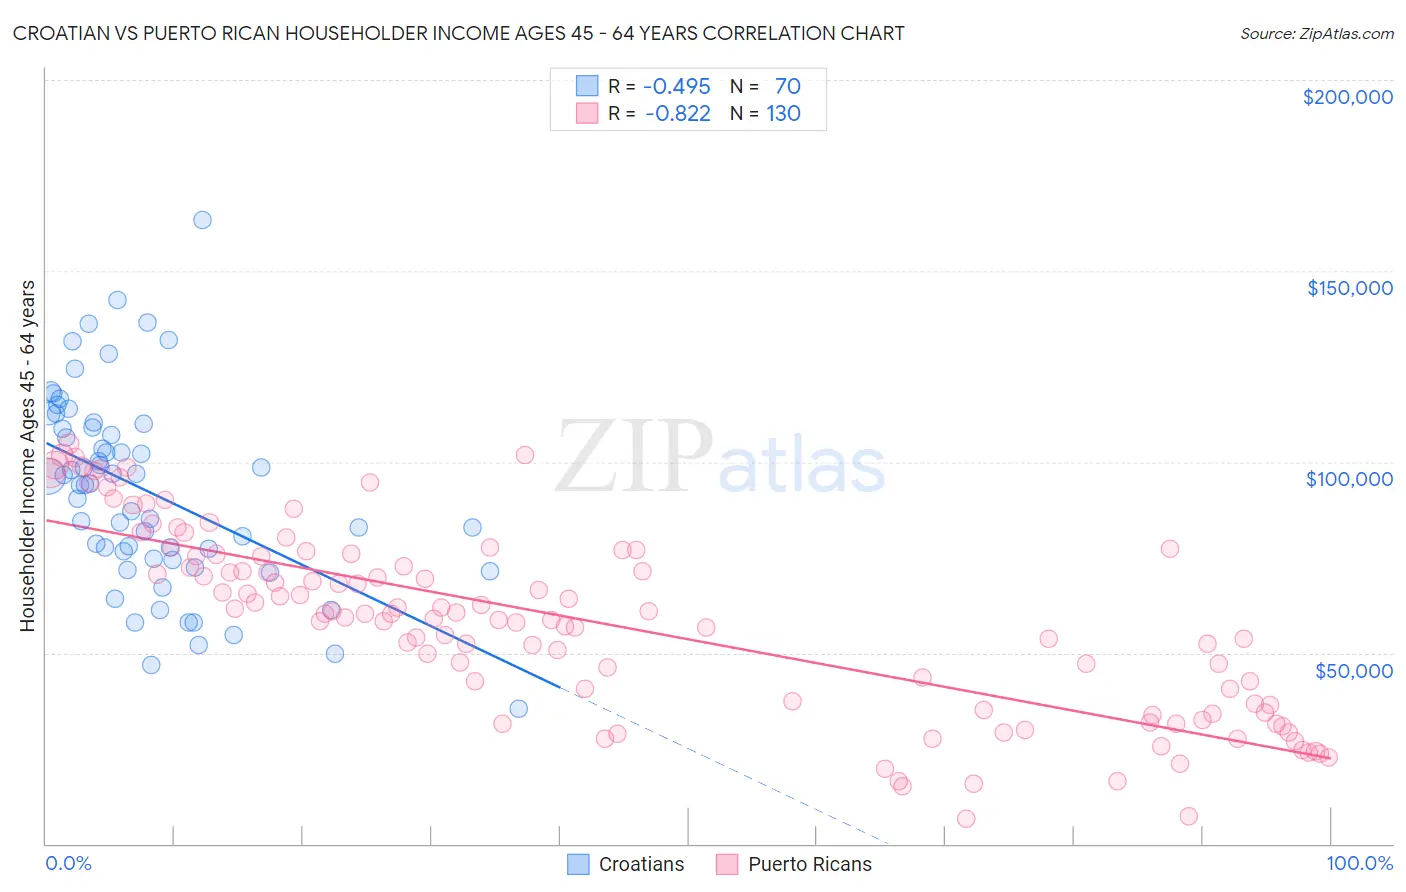 Croatian vs Puerto Rican Householder Income Ages 45 - 64 years